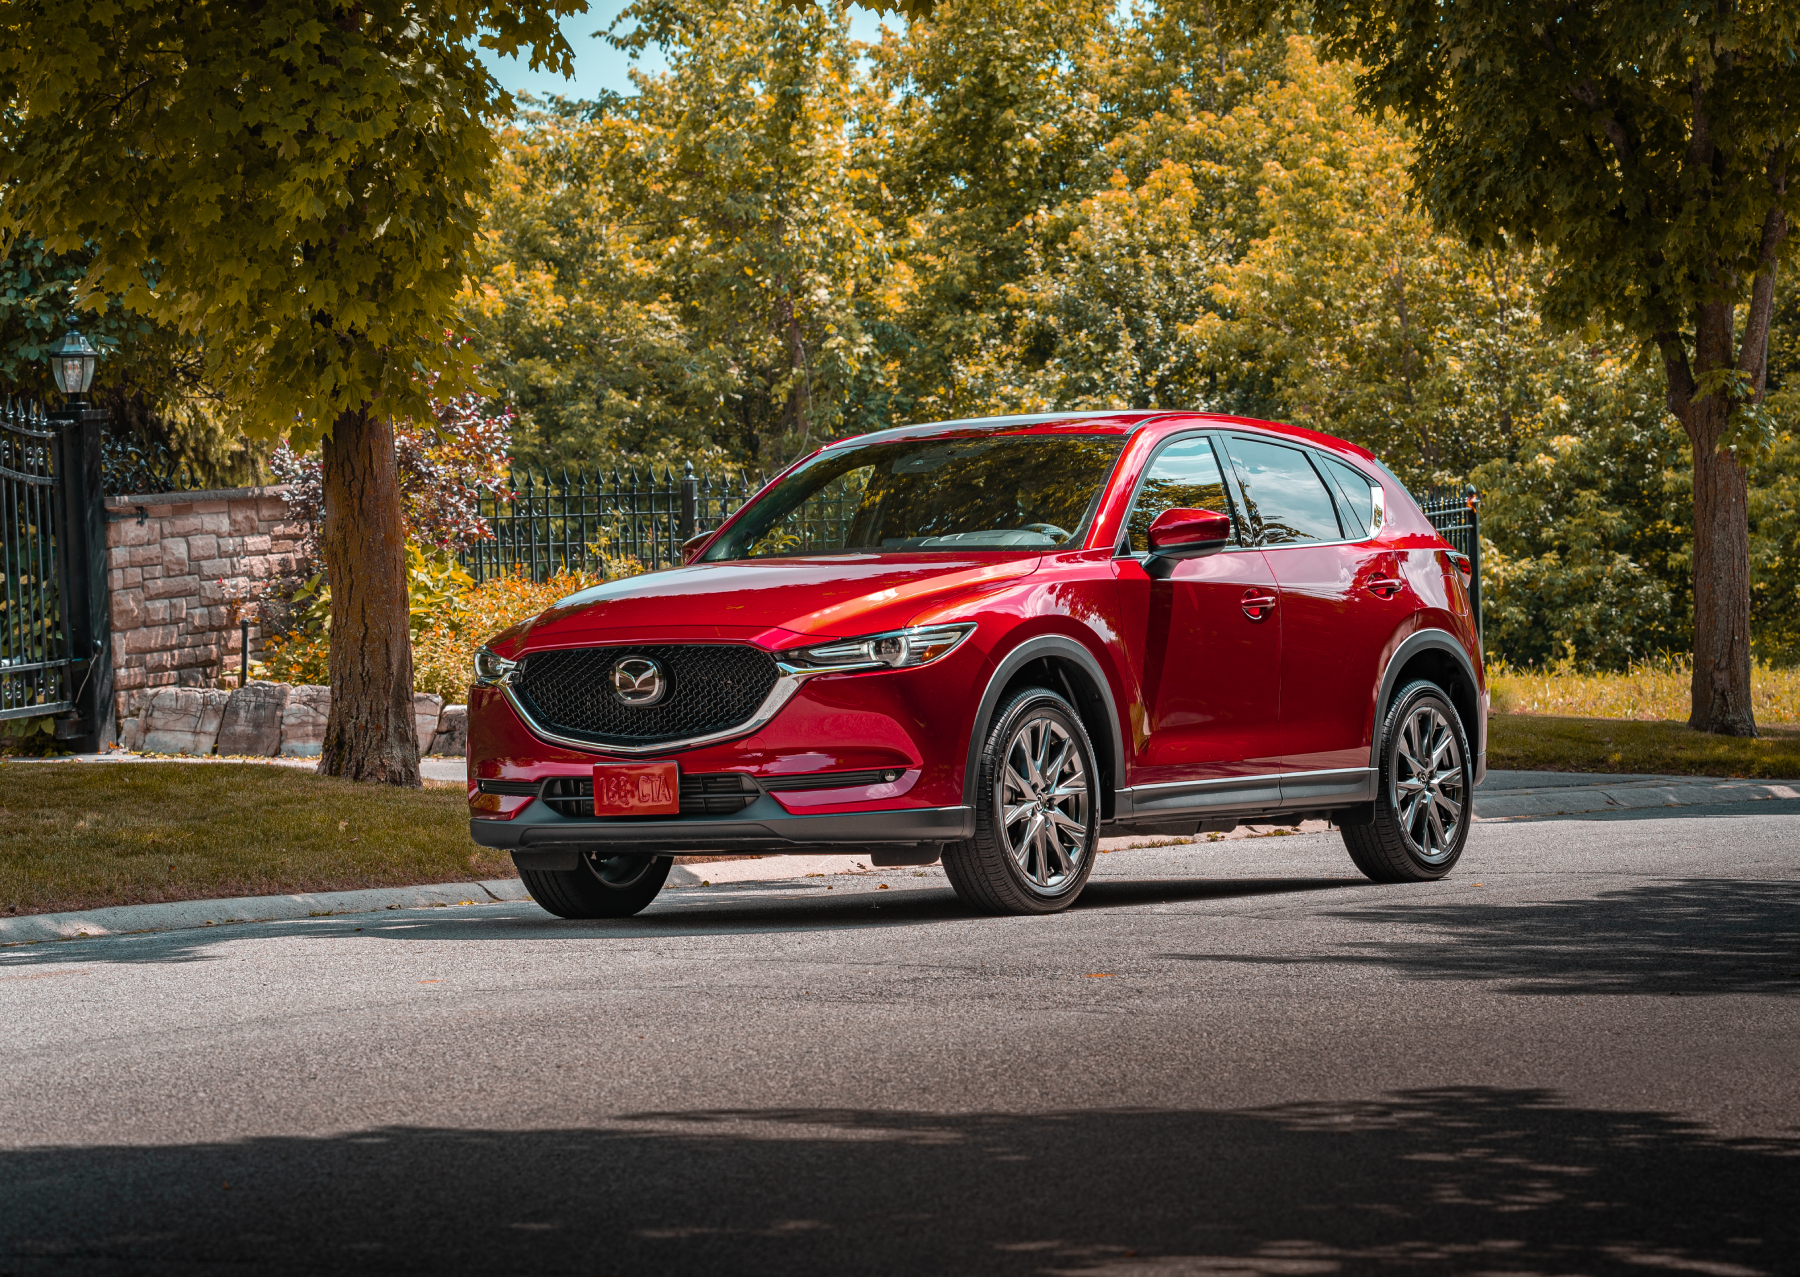 The 2020 Mazda CX-5 on display in the middle of a road